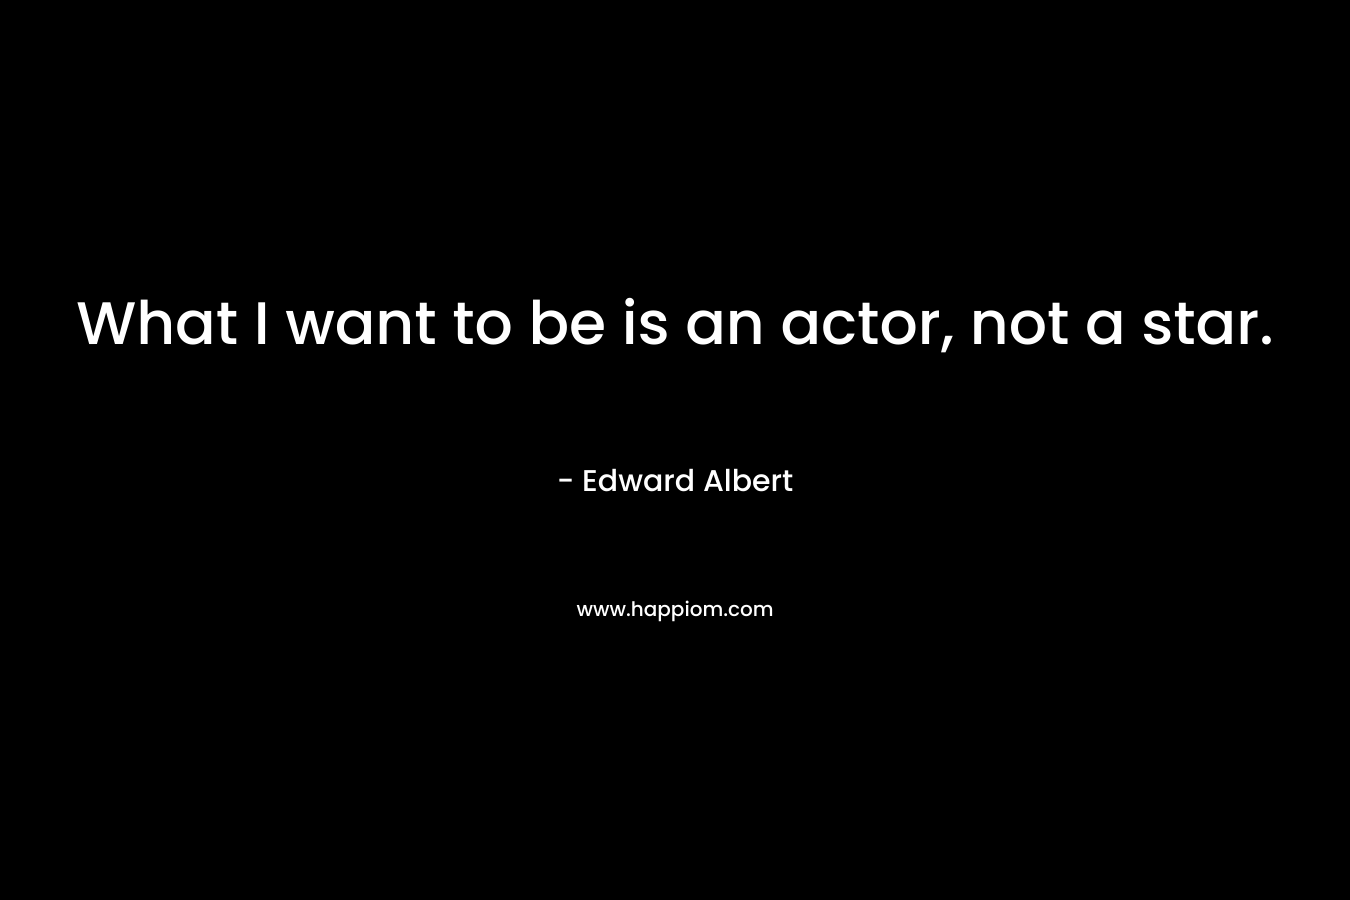 What I want to be is an actor, not a star.